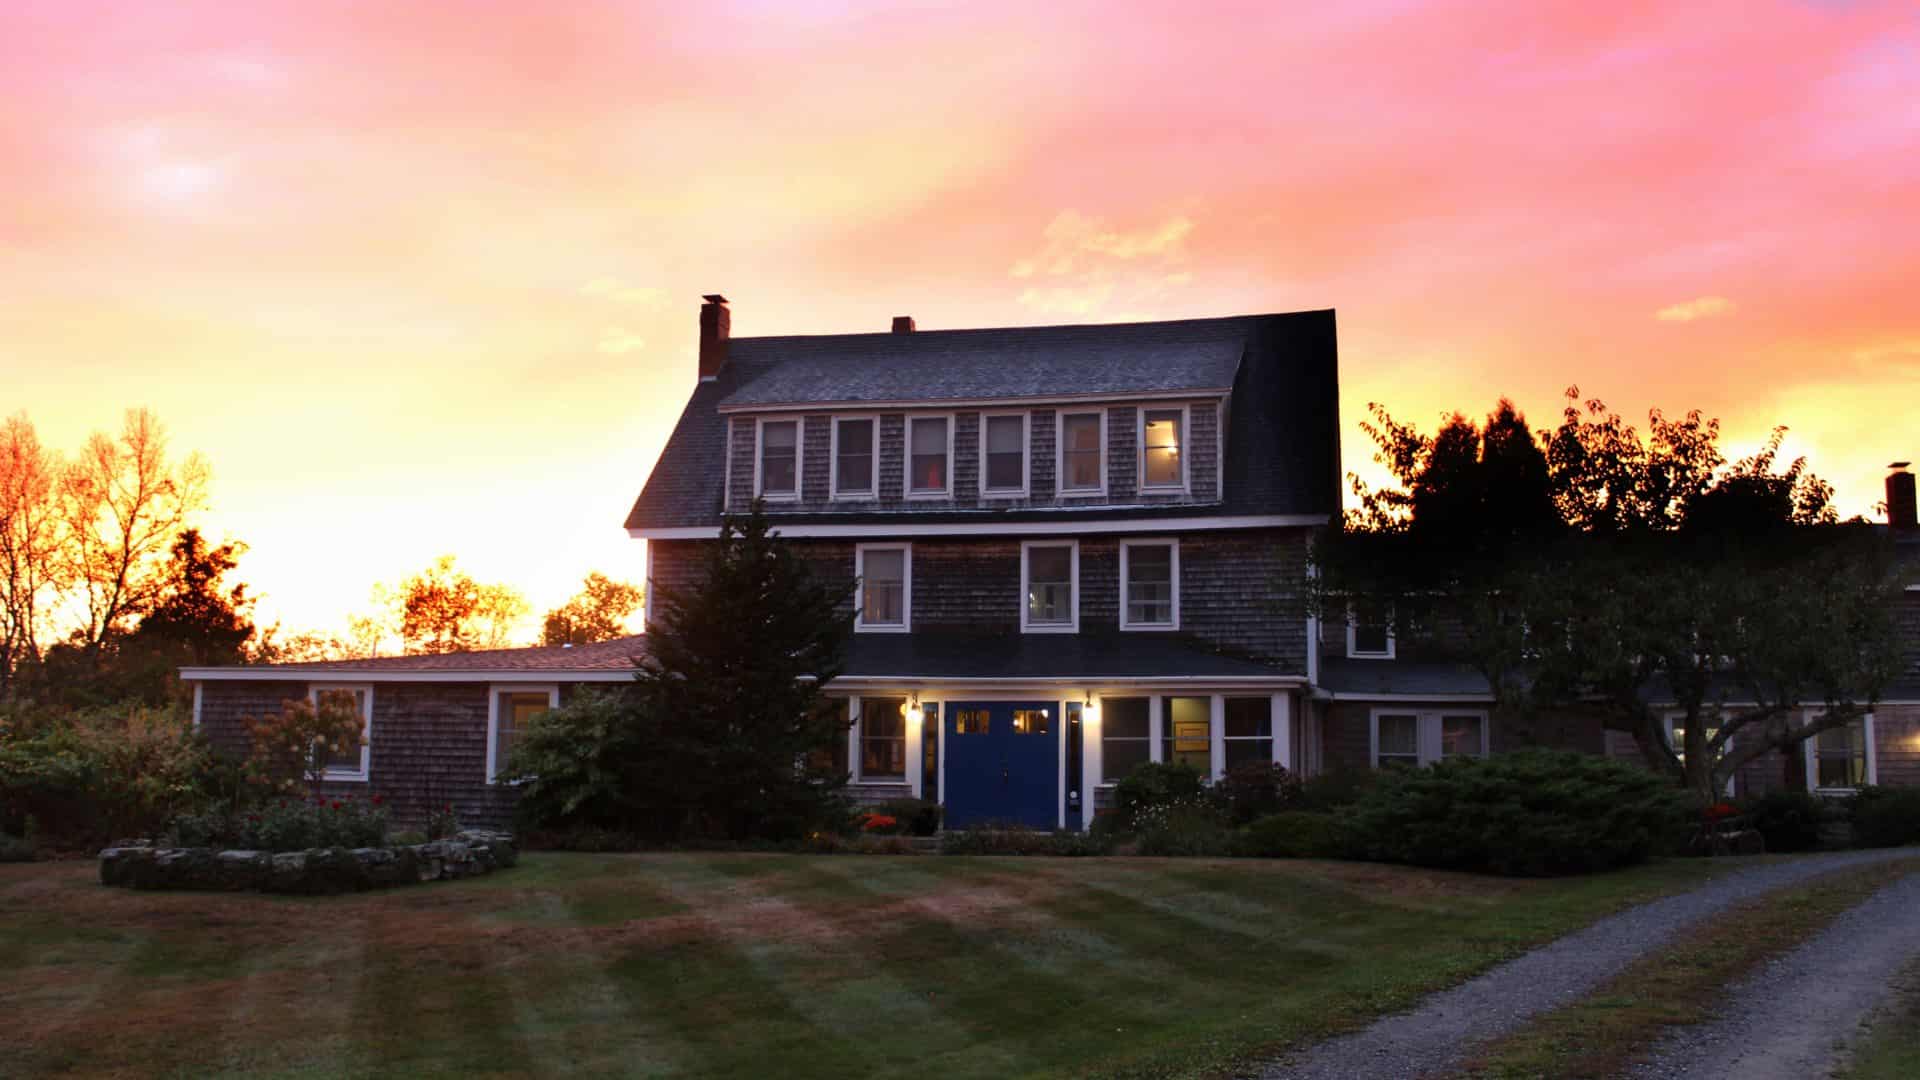 Exterior view of the property with cedar shake siding, white trim, blue door and surrounded by green grass, trees, and bushes at dusk